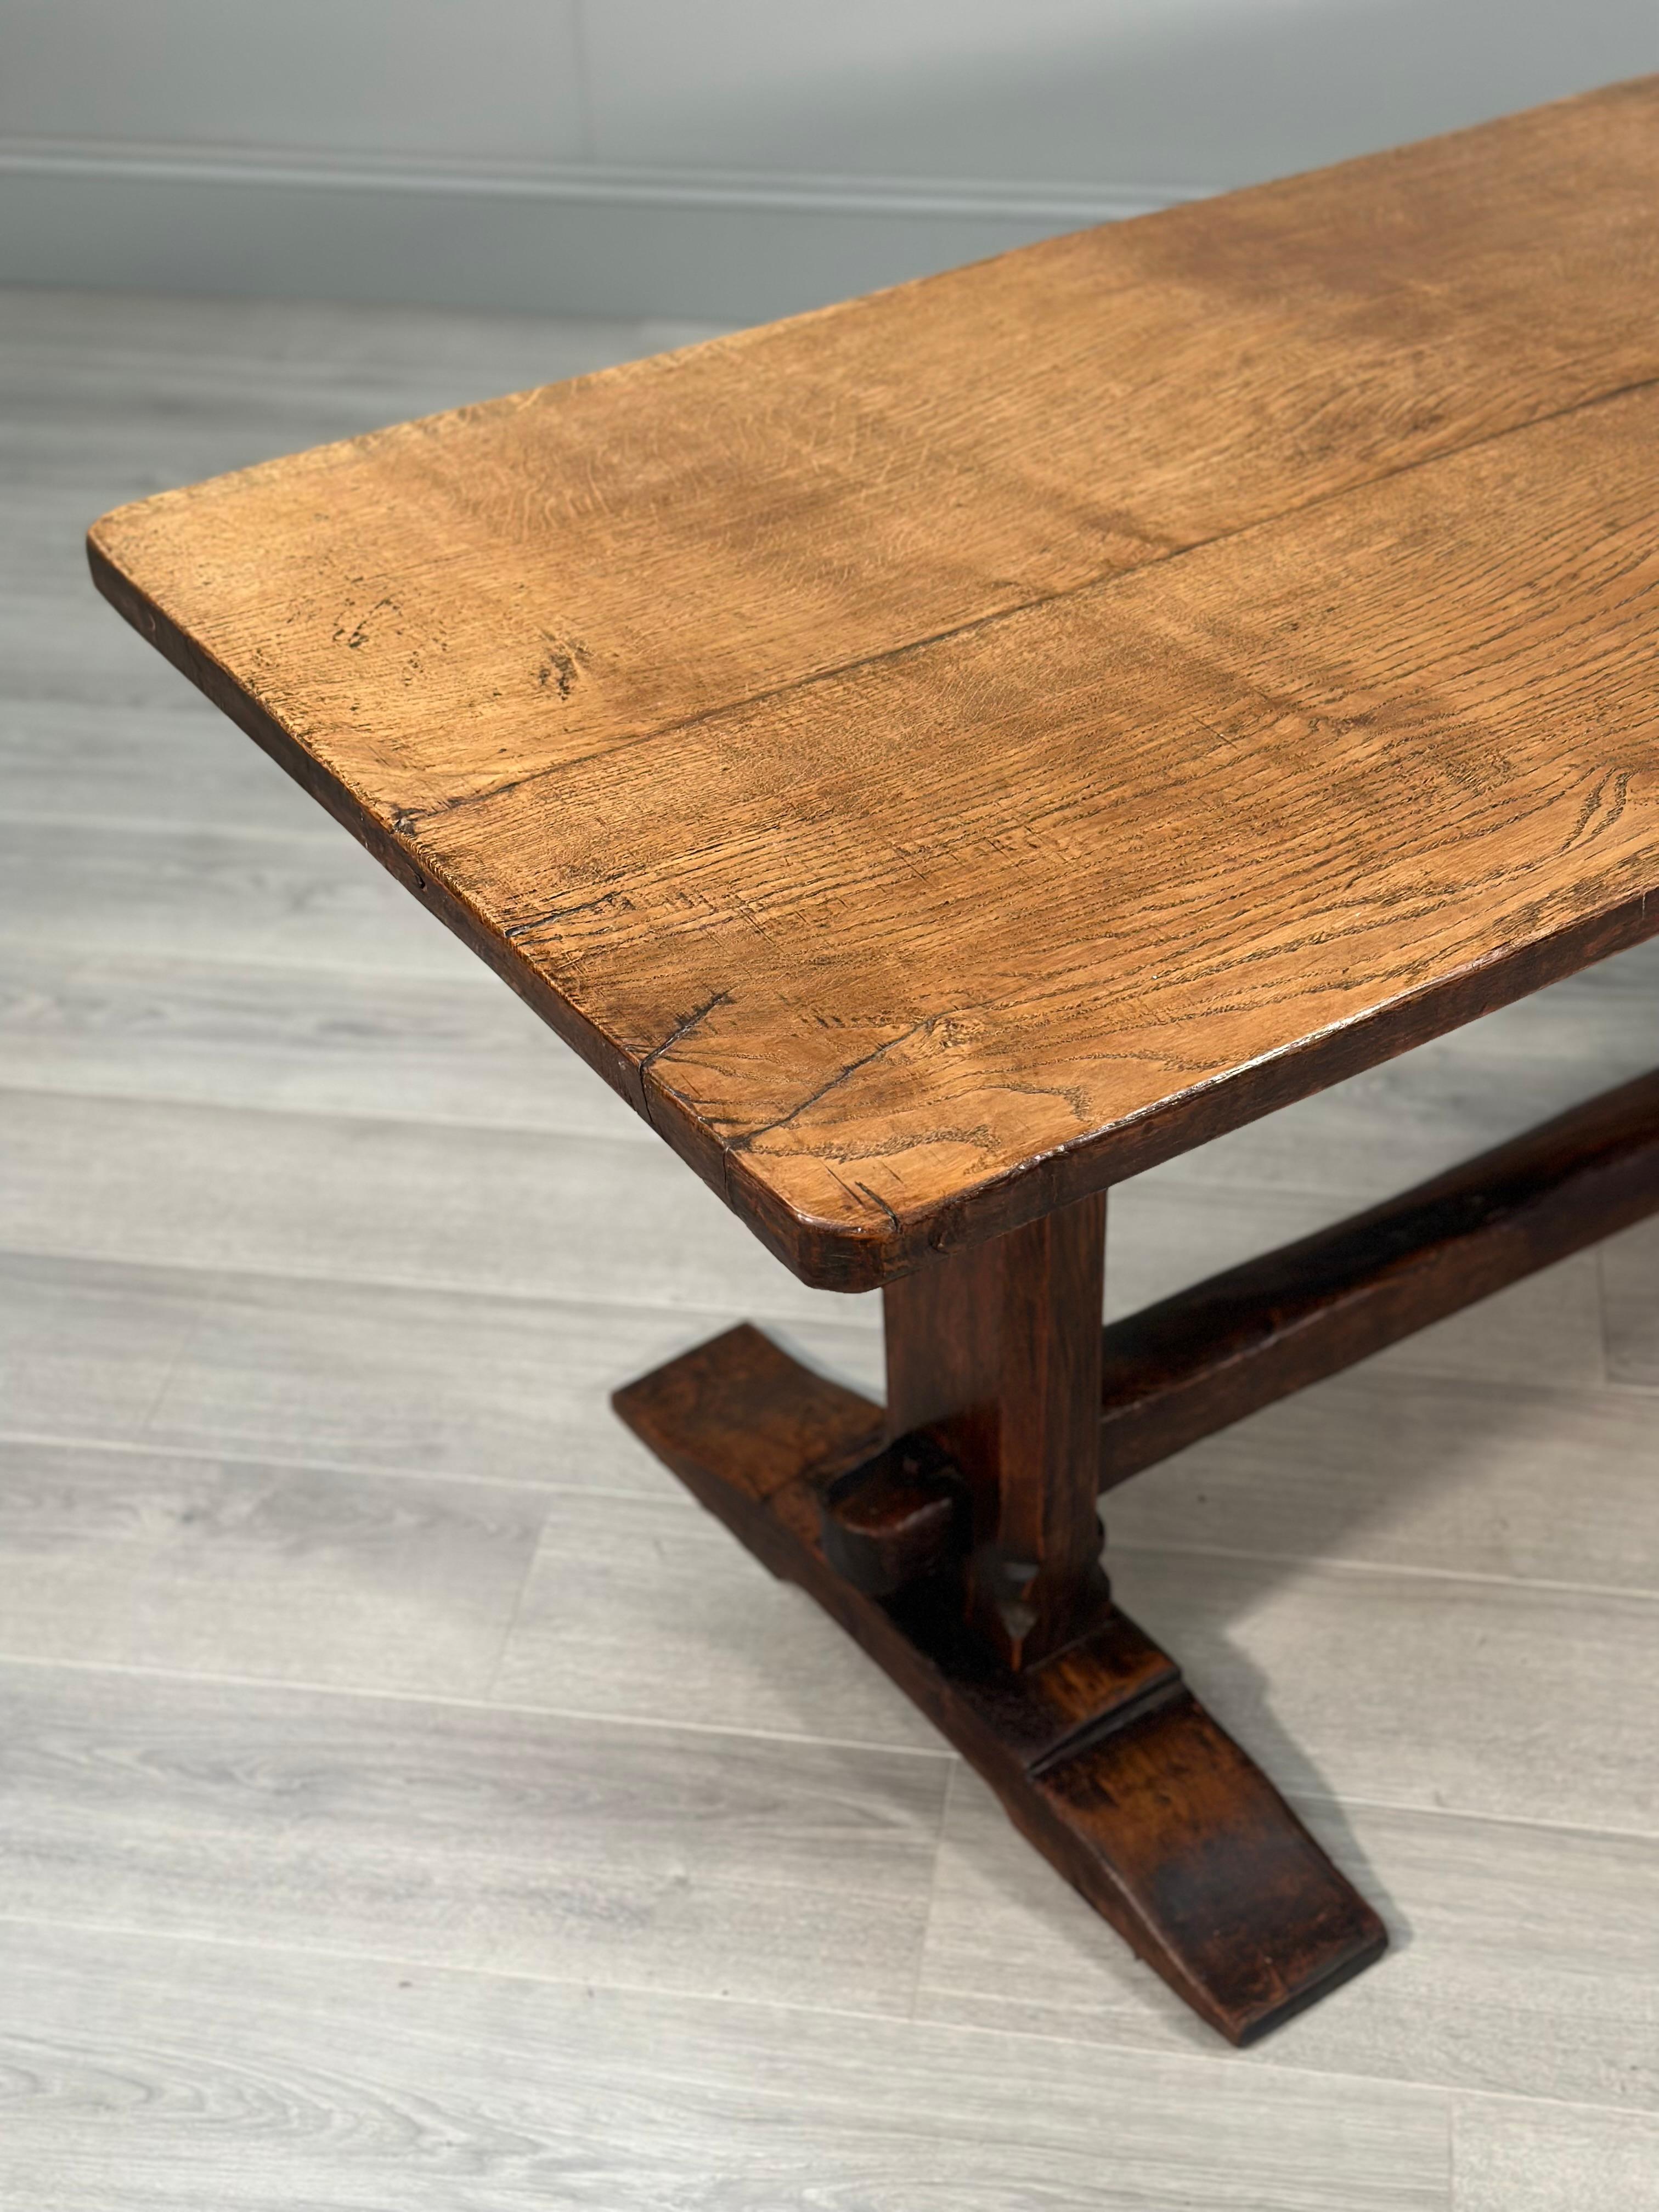 A superb Georgian refectory table dating to c.1800 and made with the finest quarter sawn English oak. The table sits on a fully pegged oak base with a 2 plank thick top that has aged to a wonderful golden oak colour. A fantastic example that is in